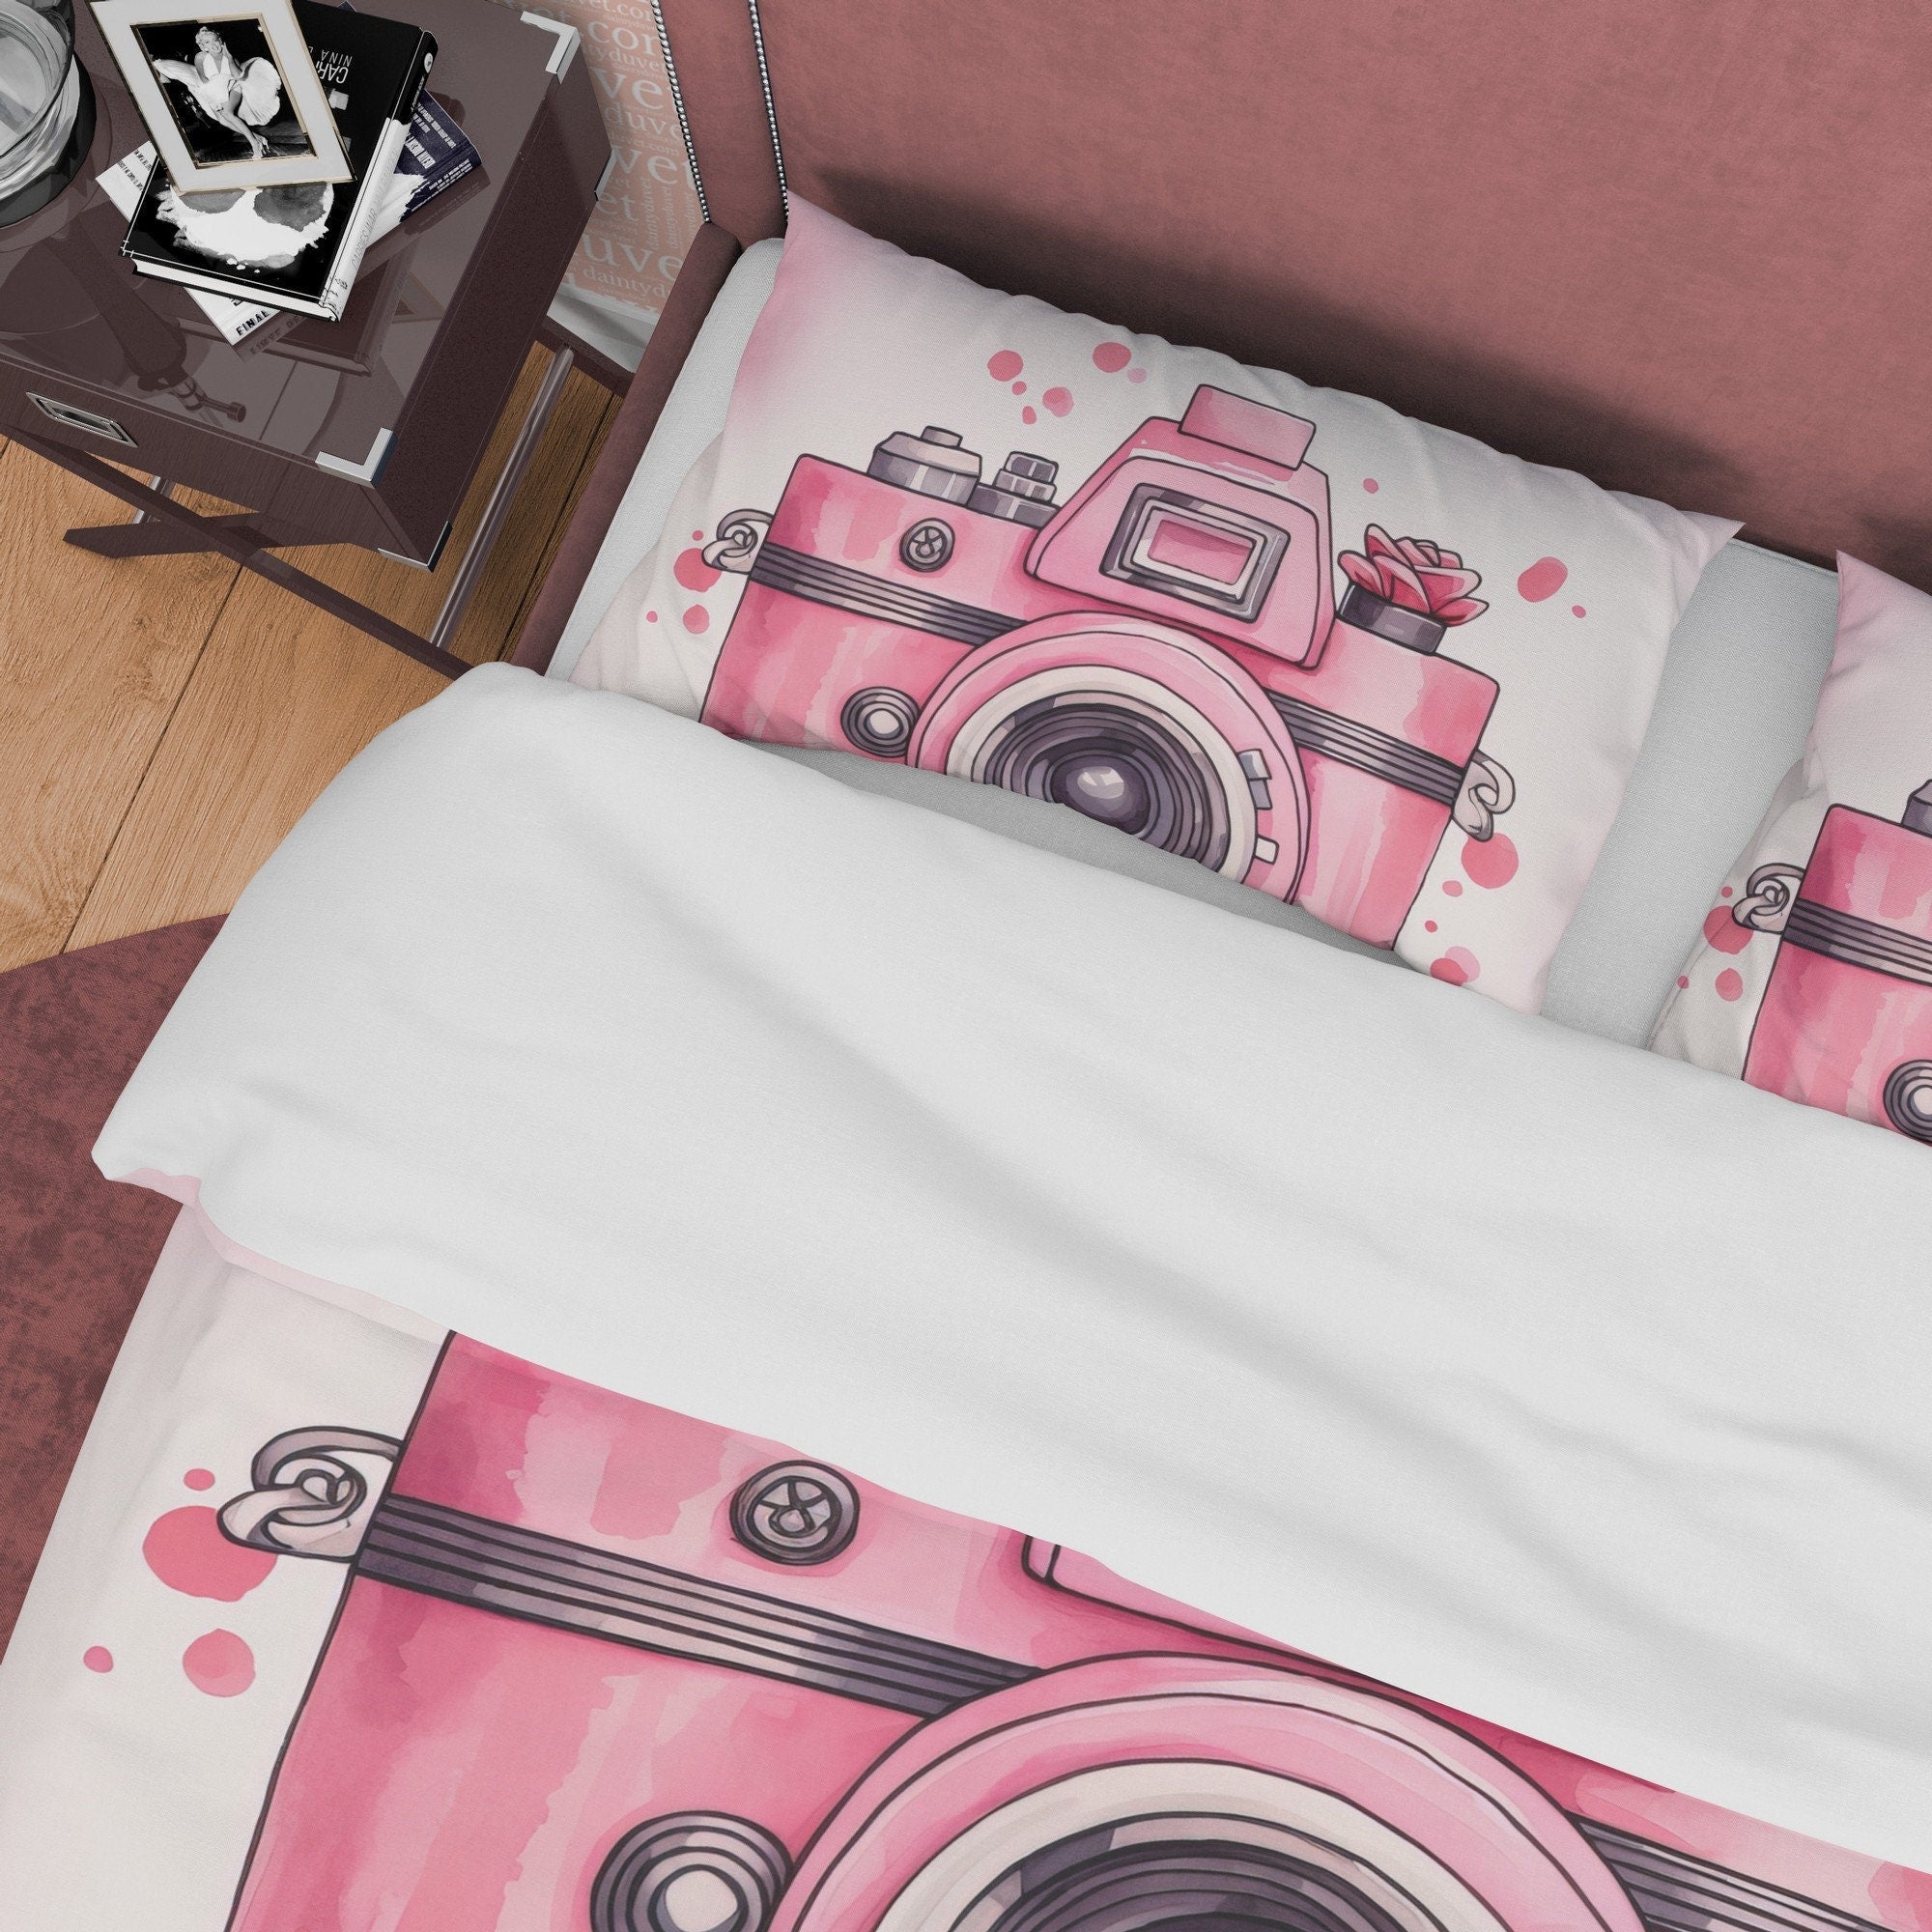 Retro Camera Duvet Cover Set Baby Pink Bedding, Vintage Girly Bedroom Set, Cute Quilt Cover, Photophille Bedspread, Photographer Gift